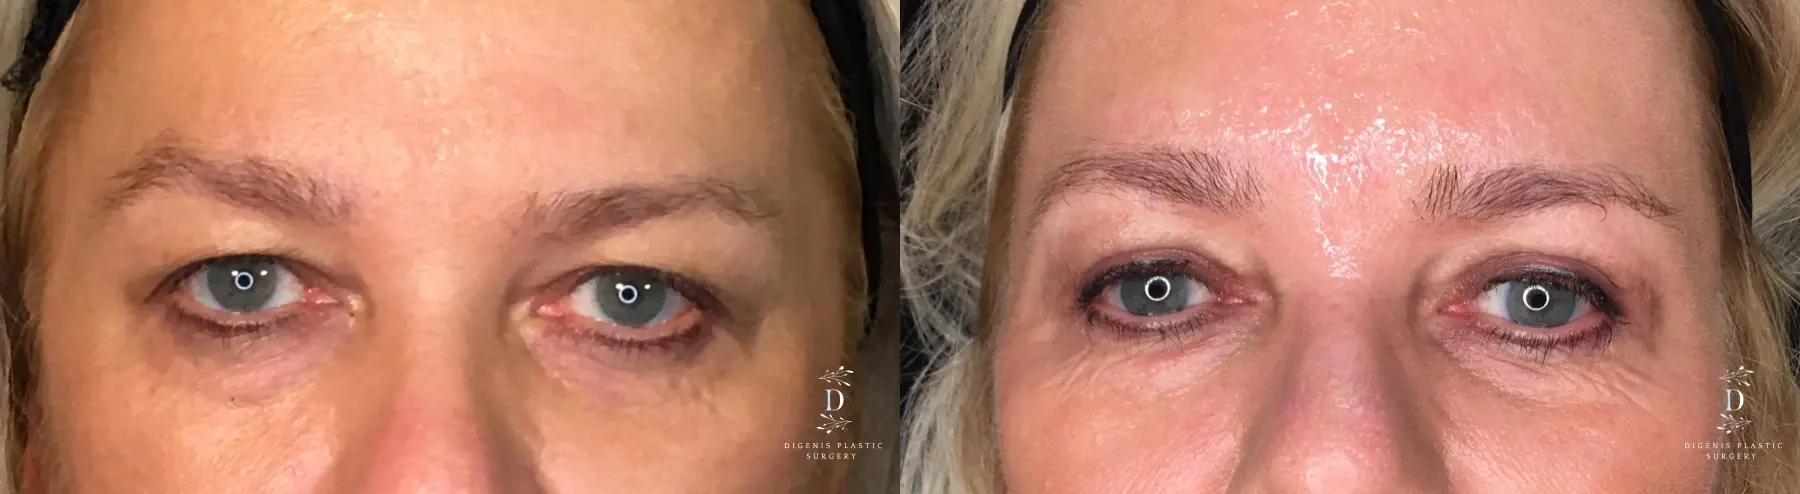 Eyelid Surgery: Patient 21 - Before and After 1